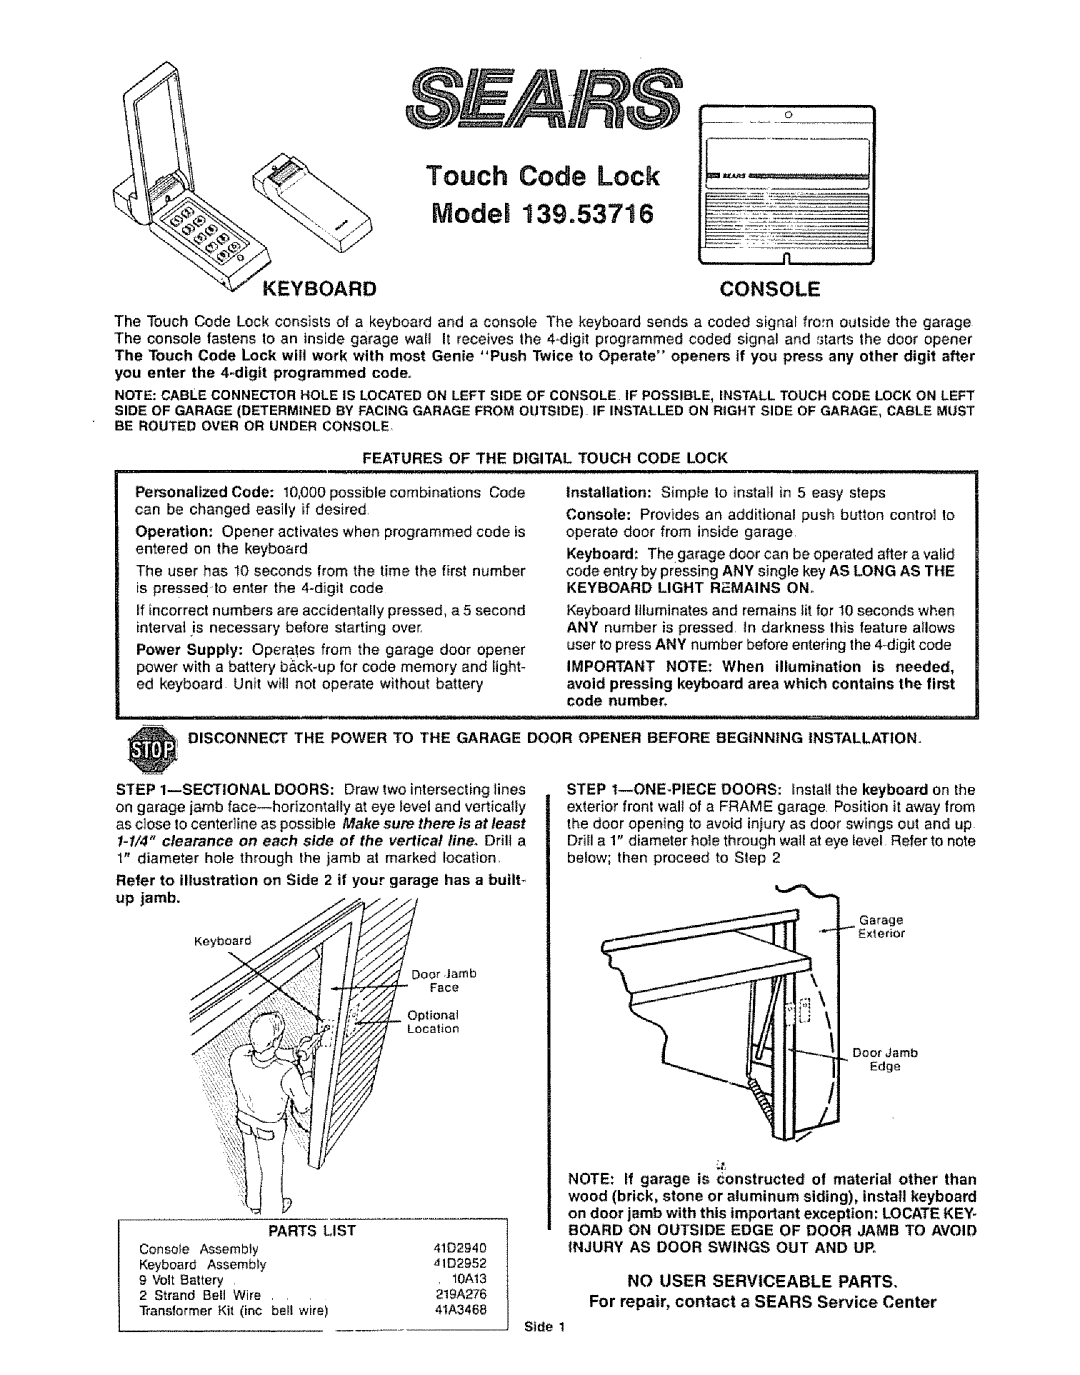 Sears 139.53716 user service Touch Code Lock, NIodel, Keyboard, Console, No User Serviceable Parts 